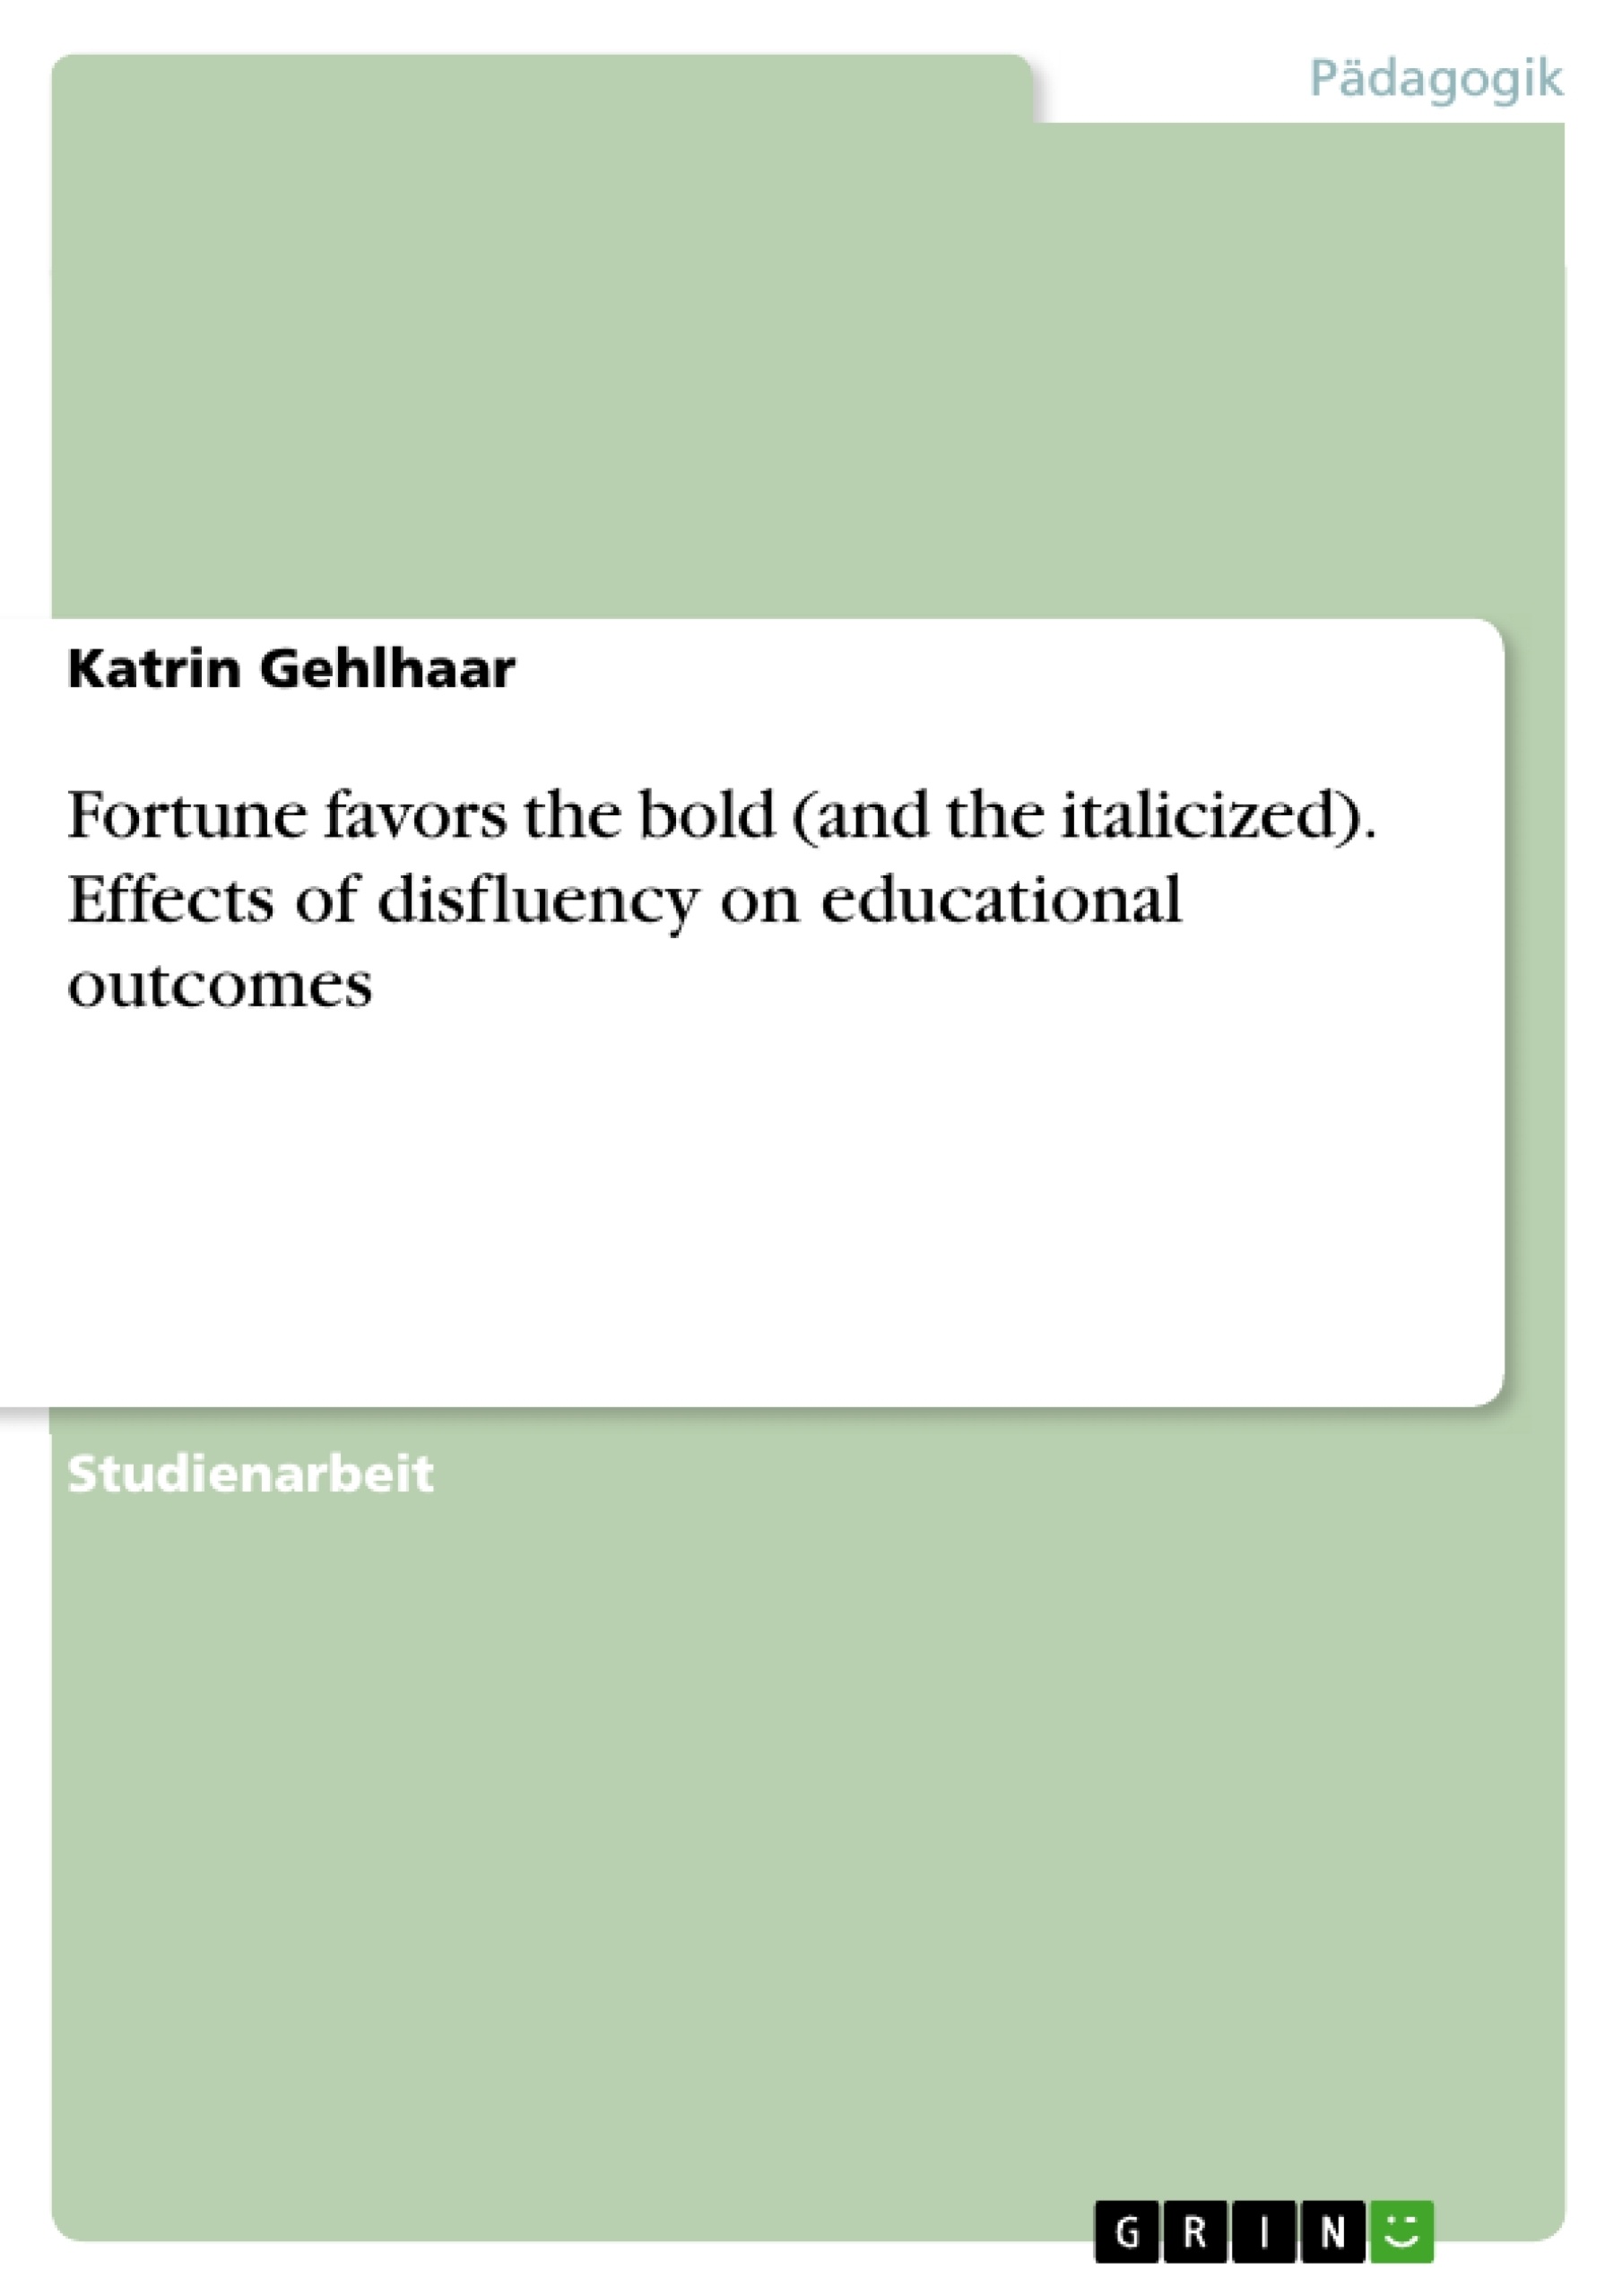 Titel: Fortune favors the bold (and the italicized). Effects of disfluency on educational outcomes